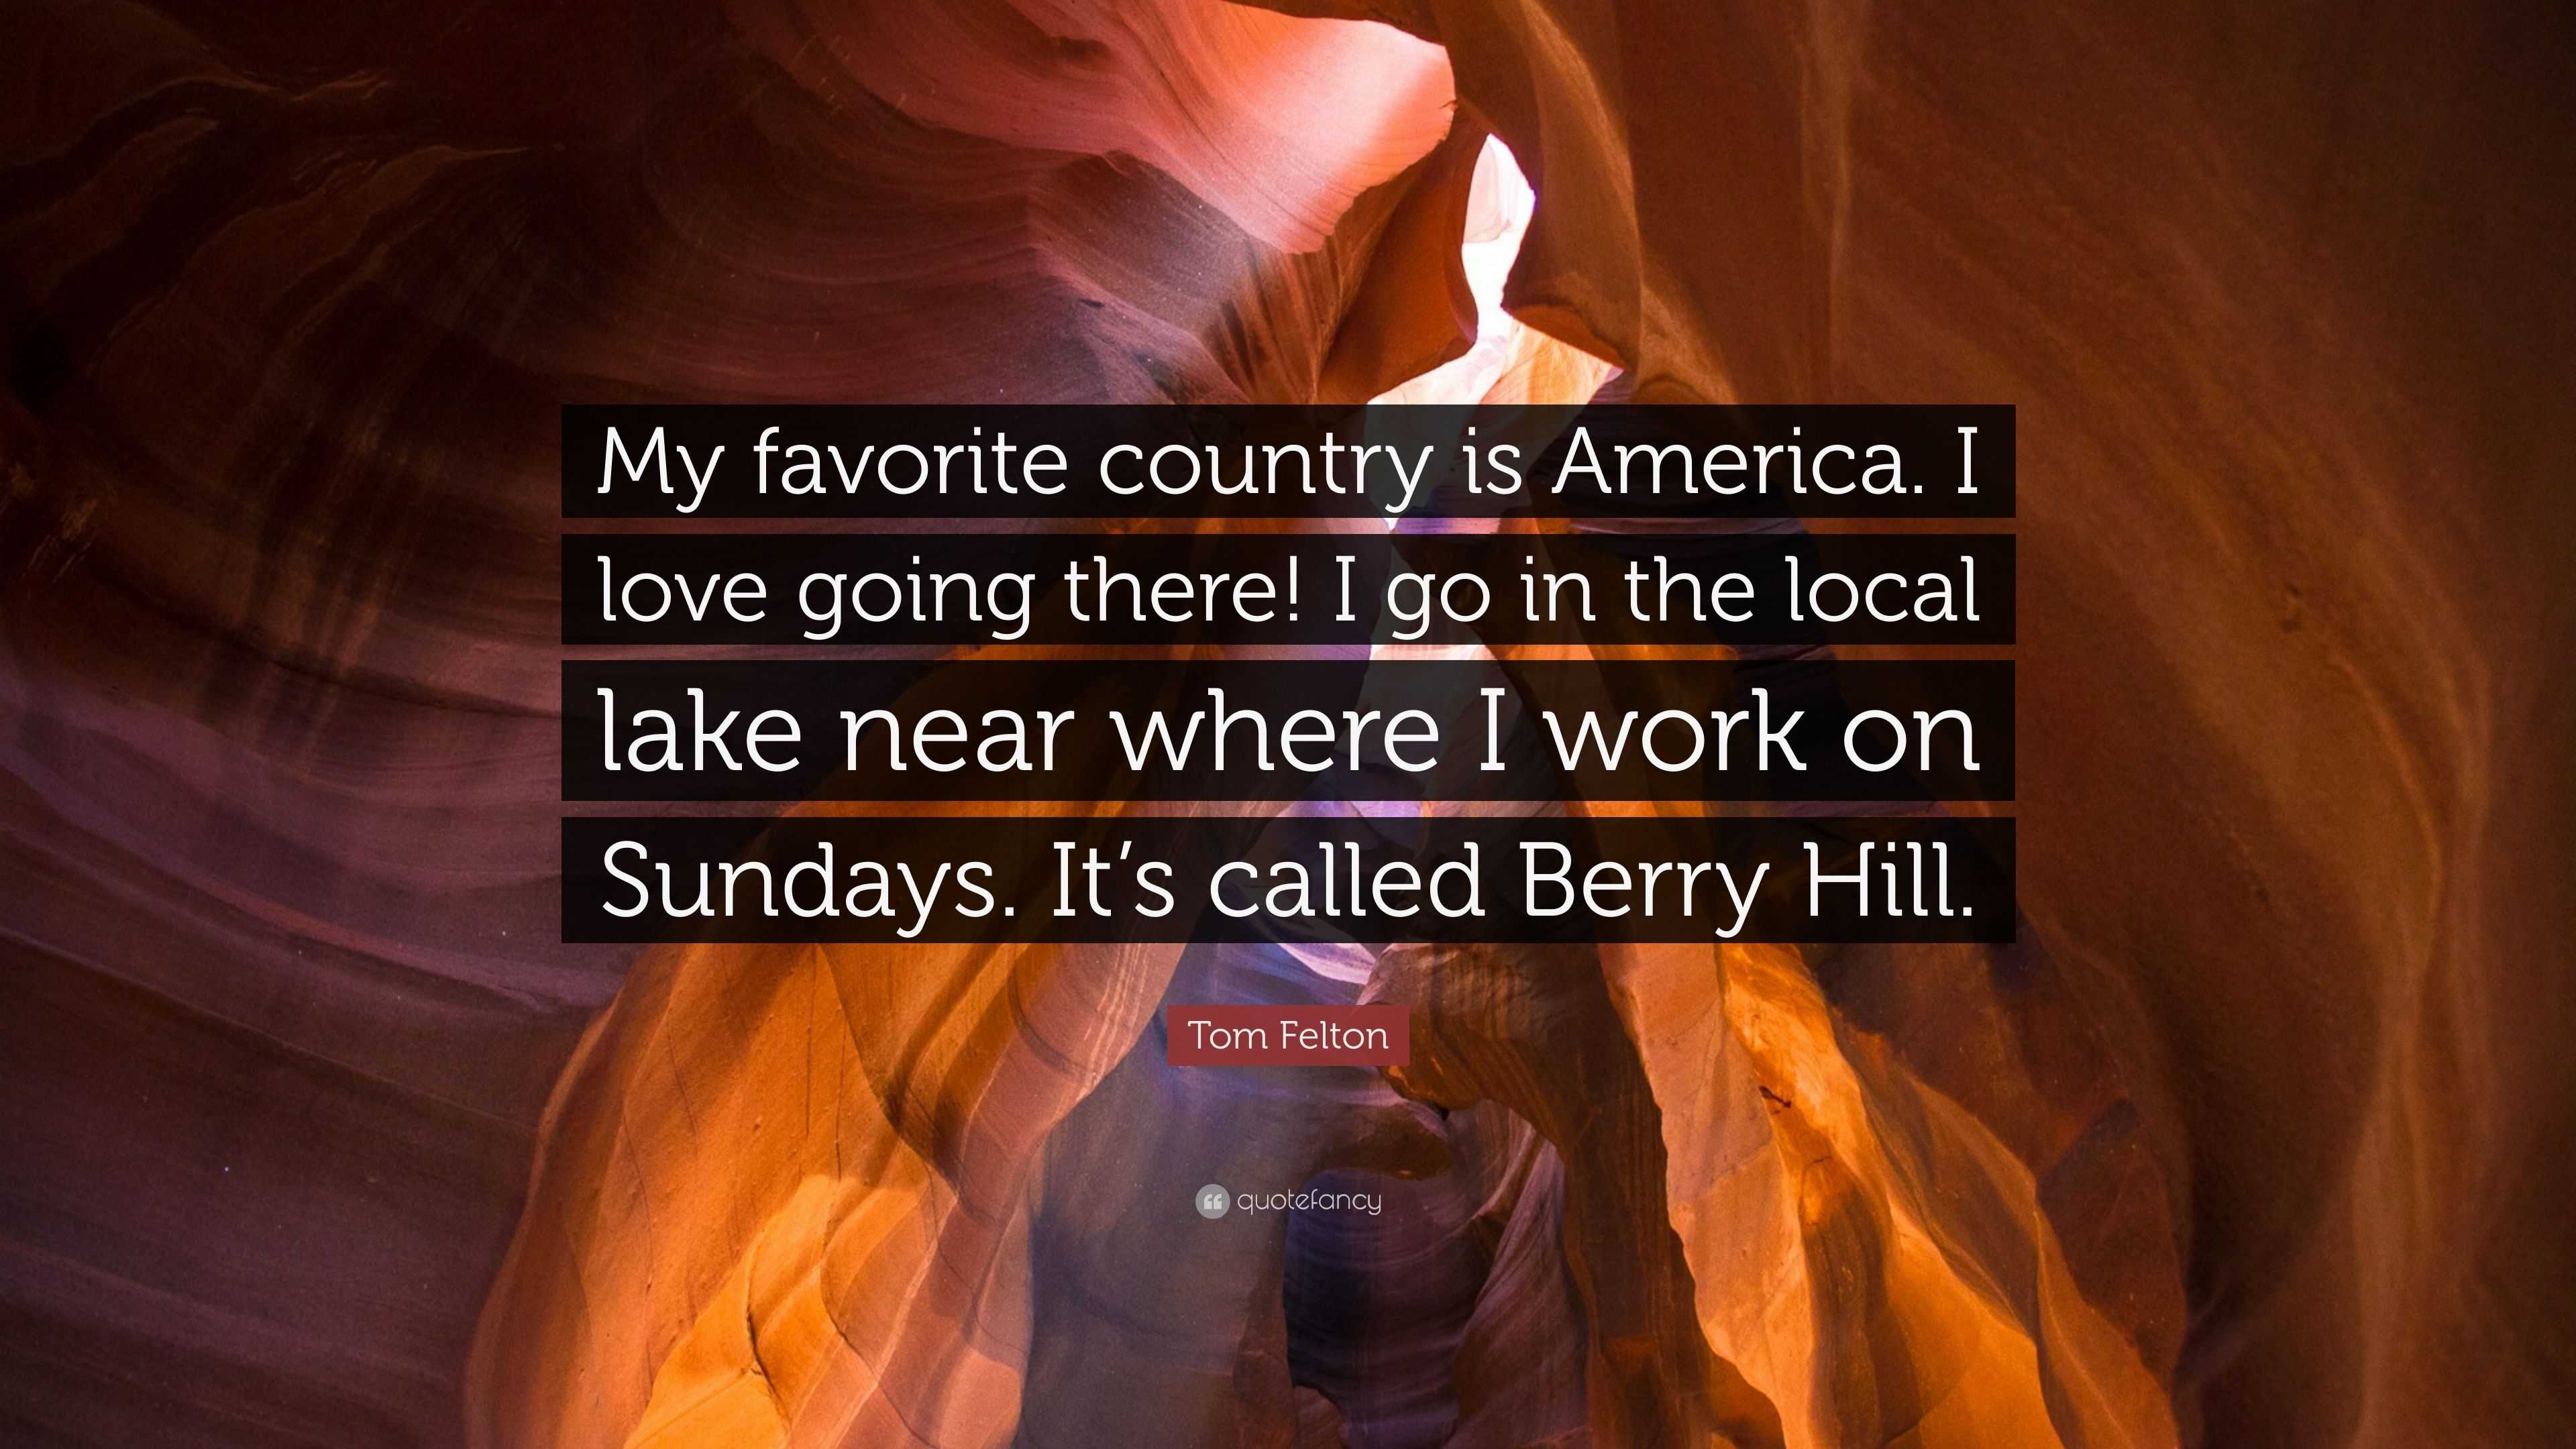 Tom Felton Quote: “My favorite country is America. I love going